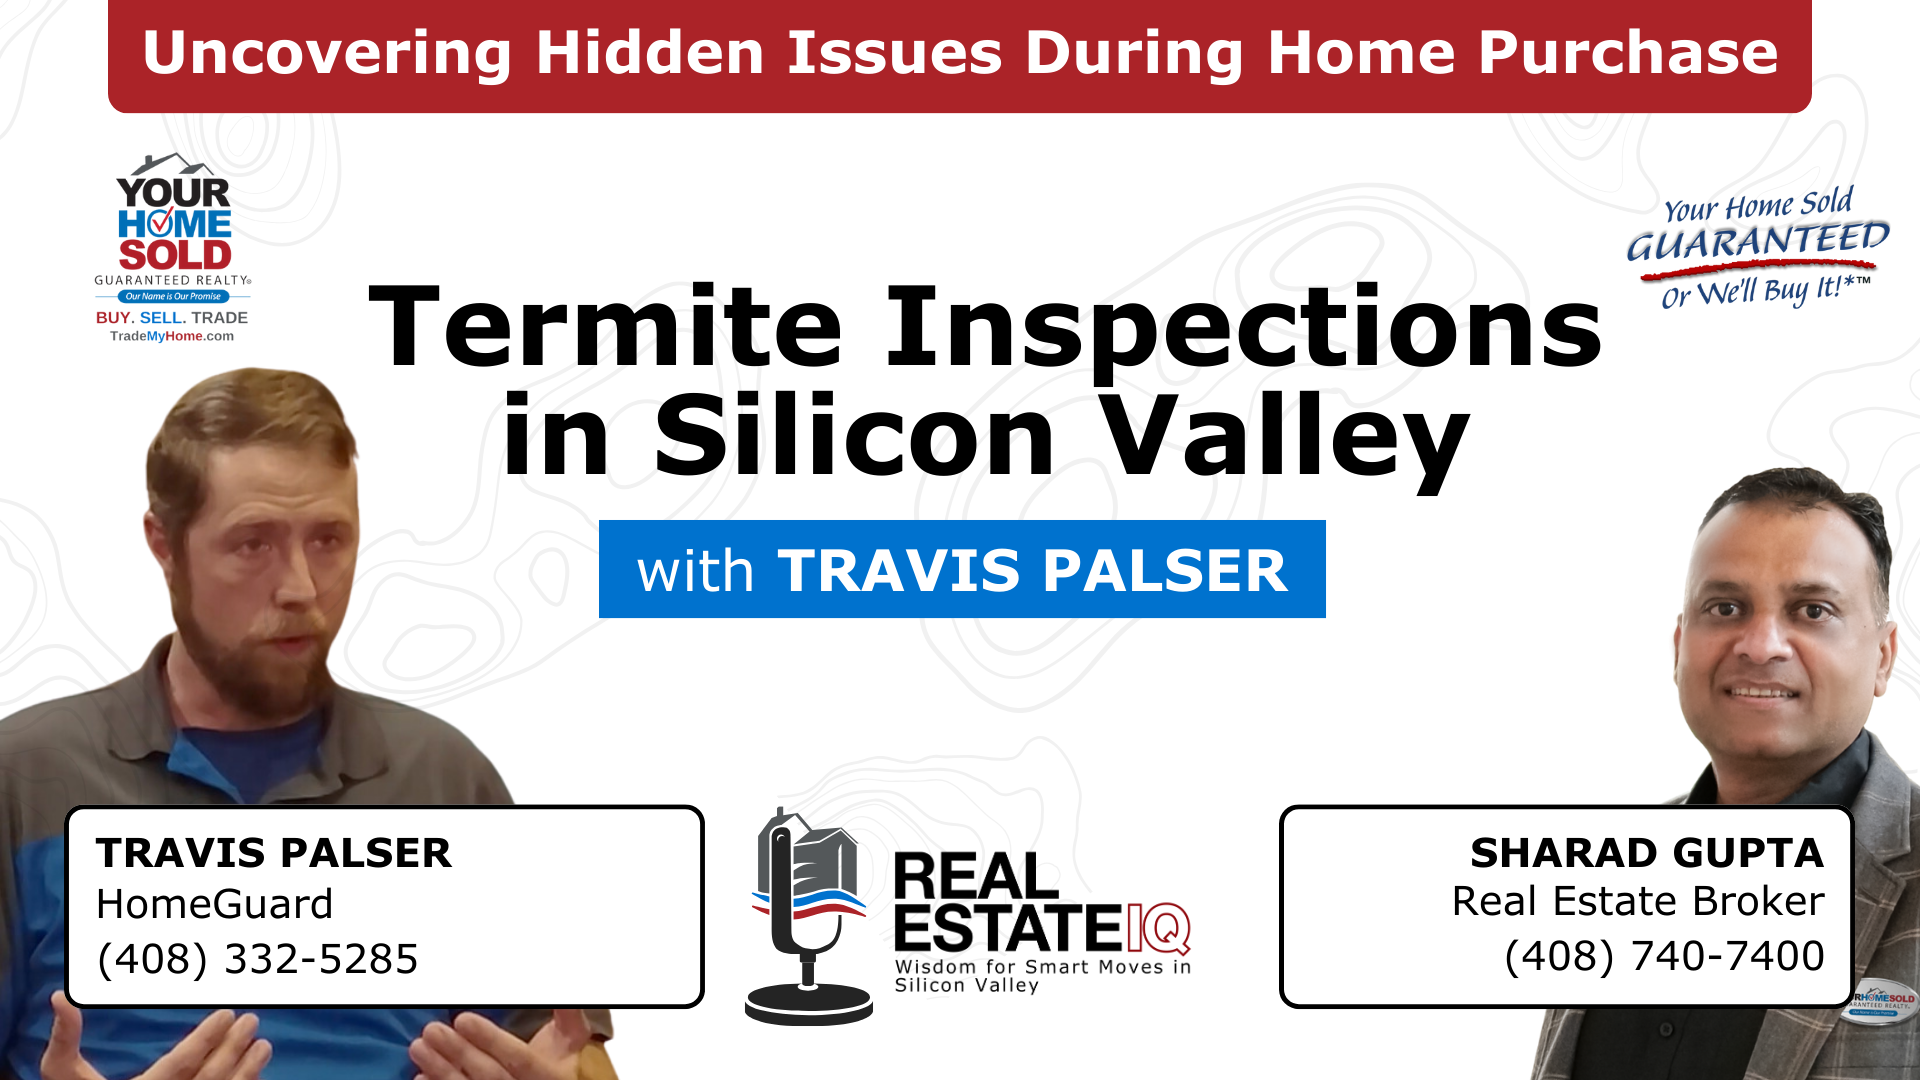 Termite Inspections: Uncovering Hidden Issues During Home Purchase in Silicon Valley